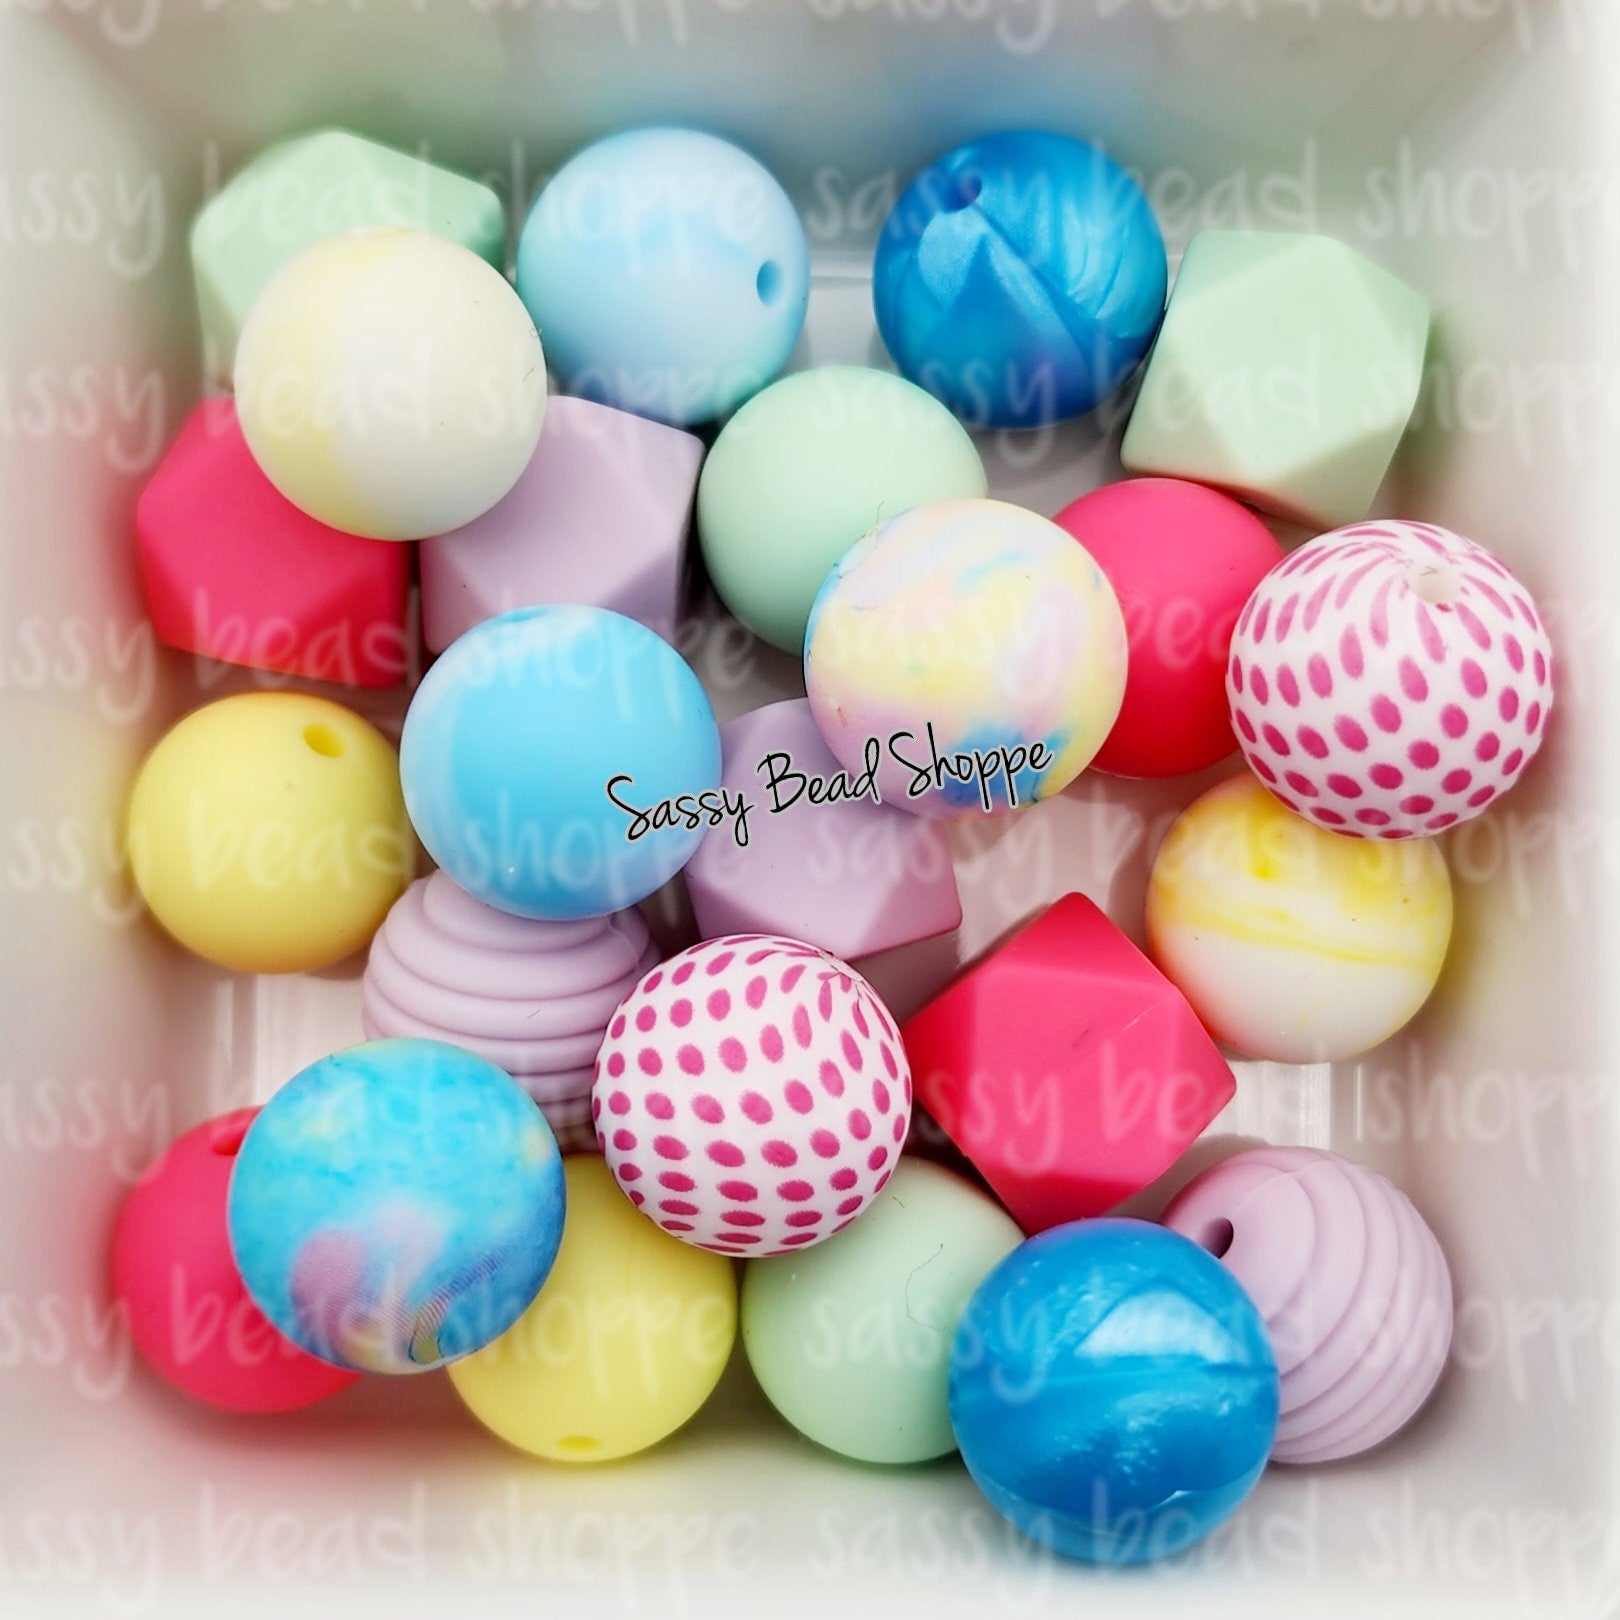 Spring Fever Silicone Bead Mix